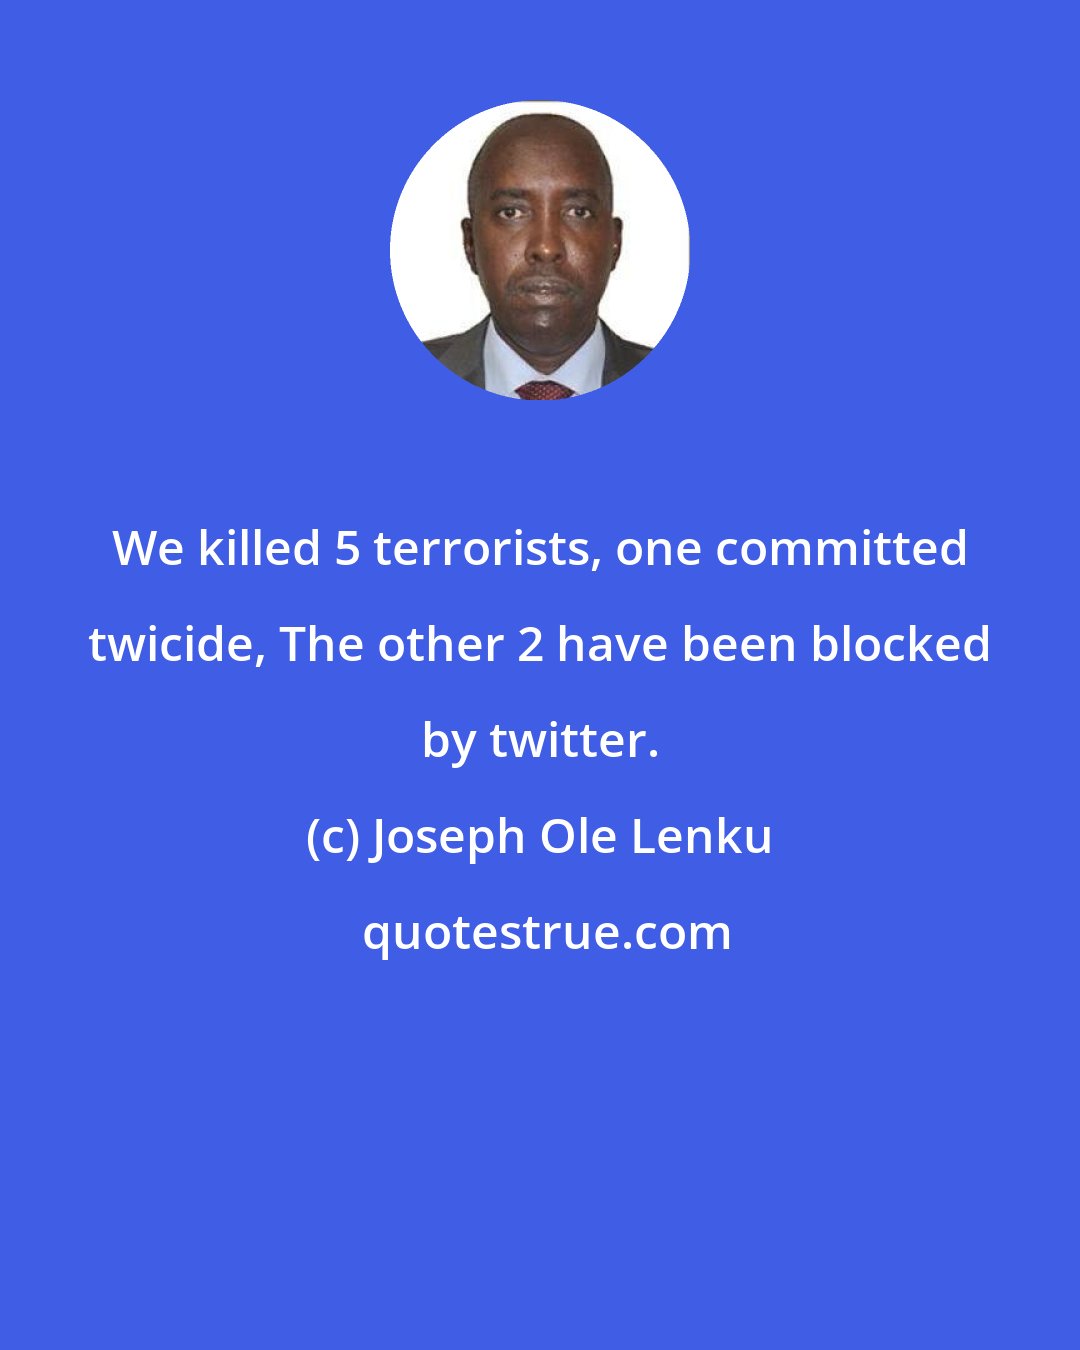 Joseph Ole Lenku: We killed 5 terrorists, one committed twicide, The other 2 have been blocked by twitter.